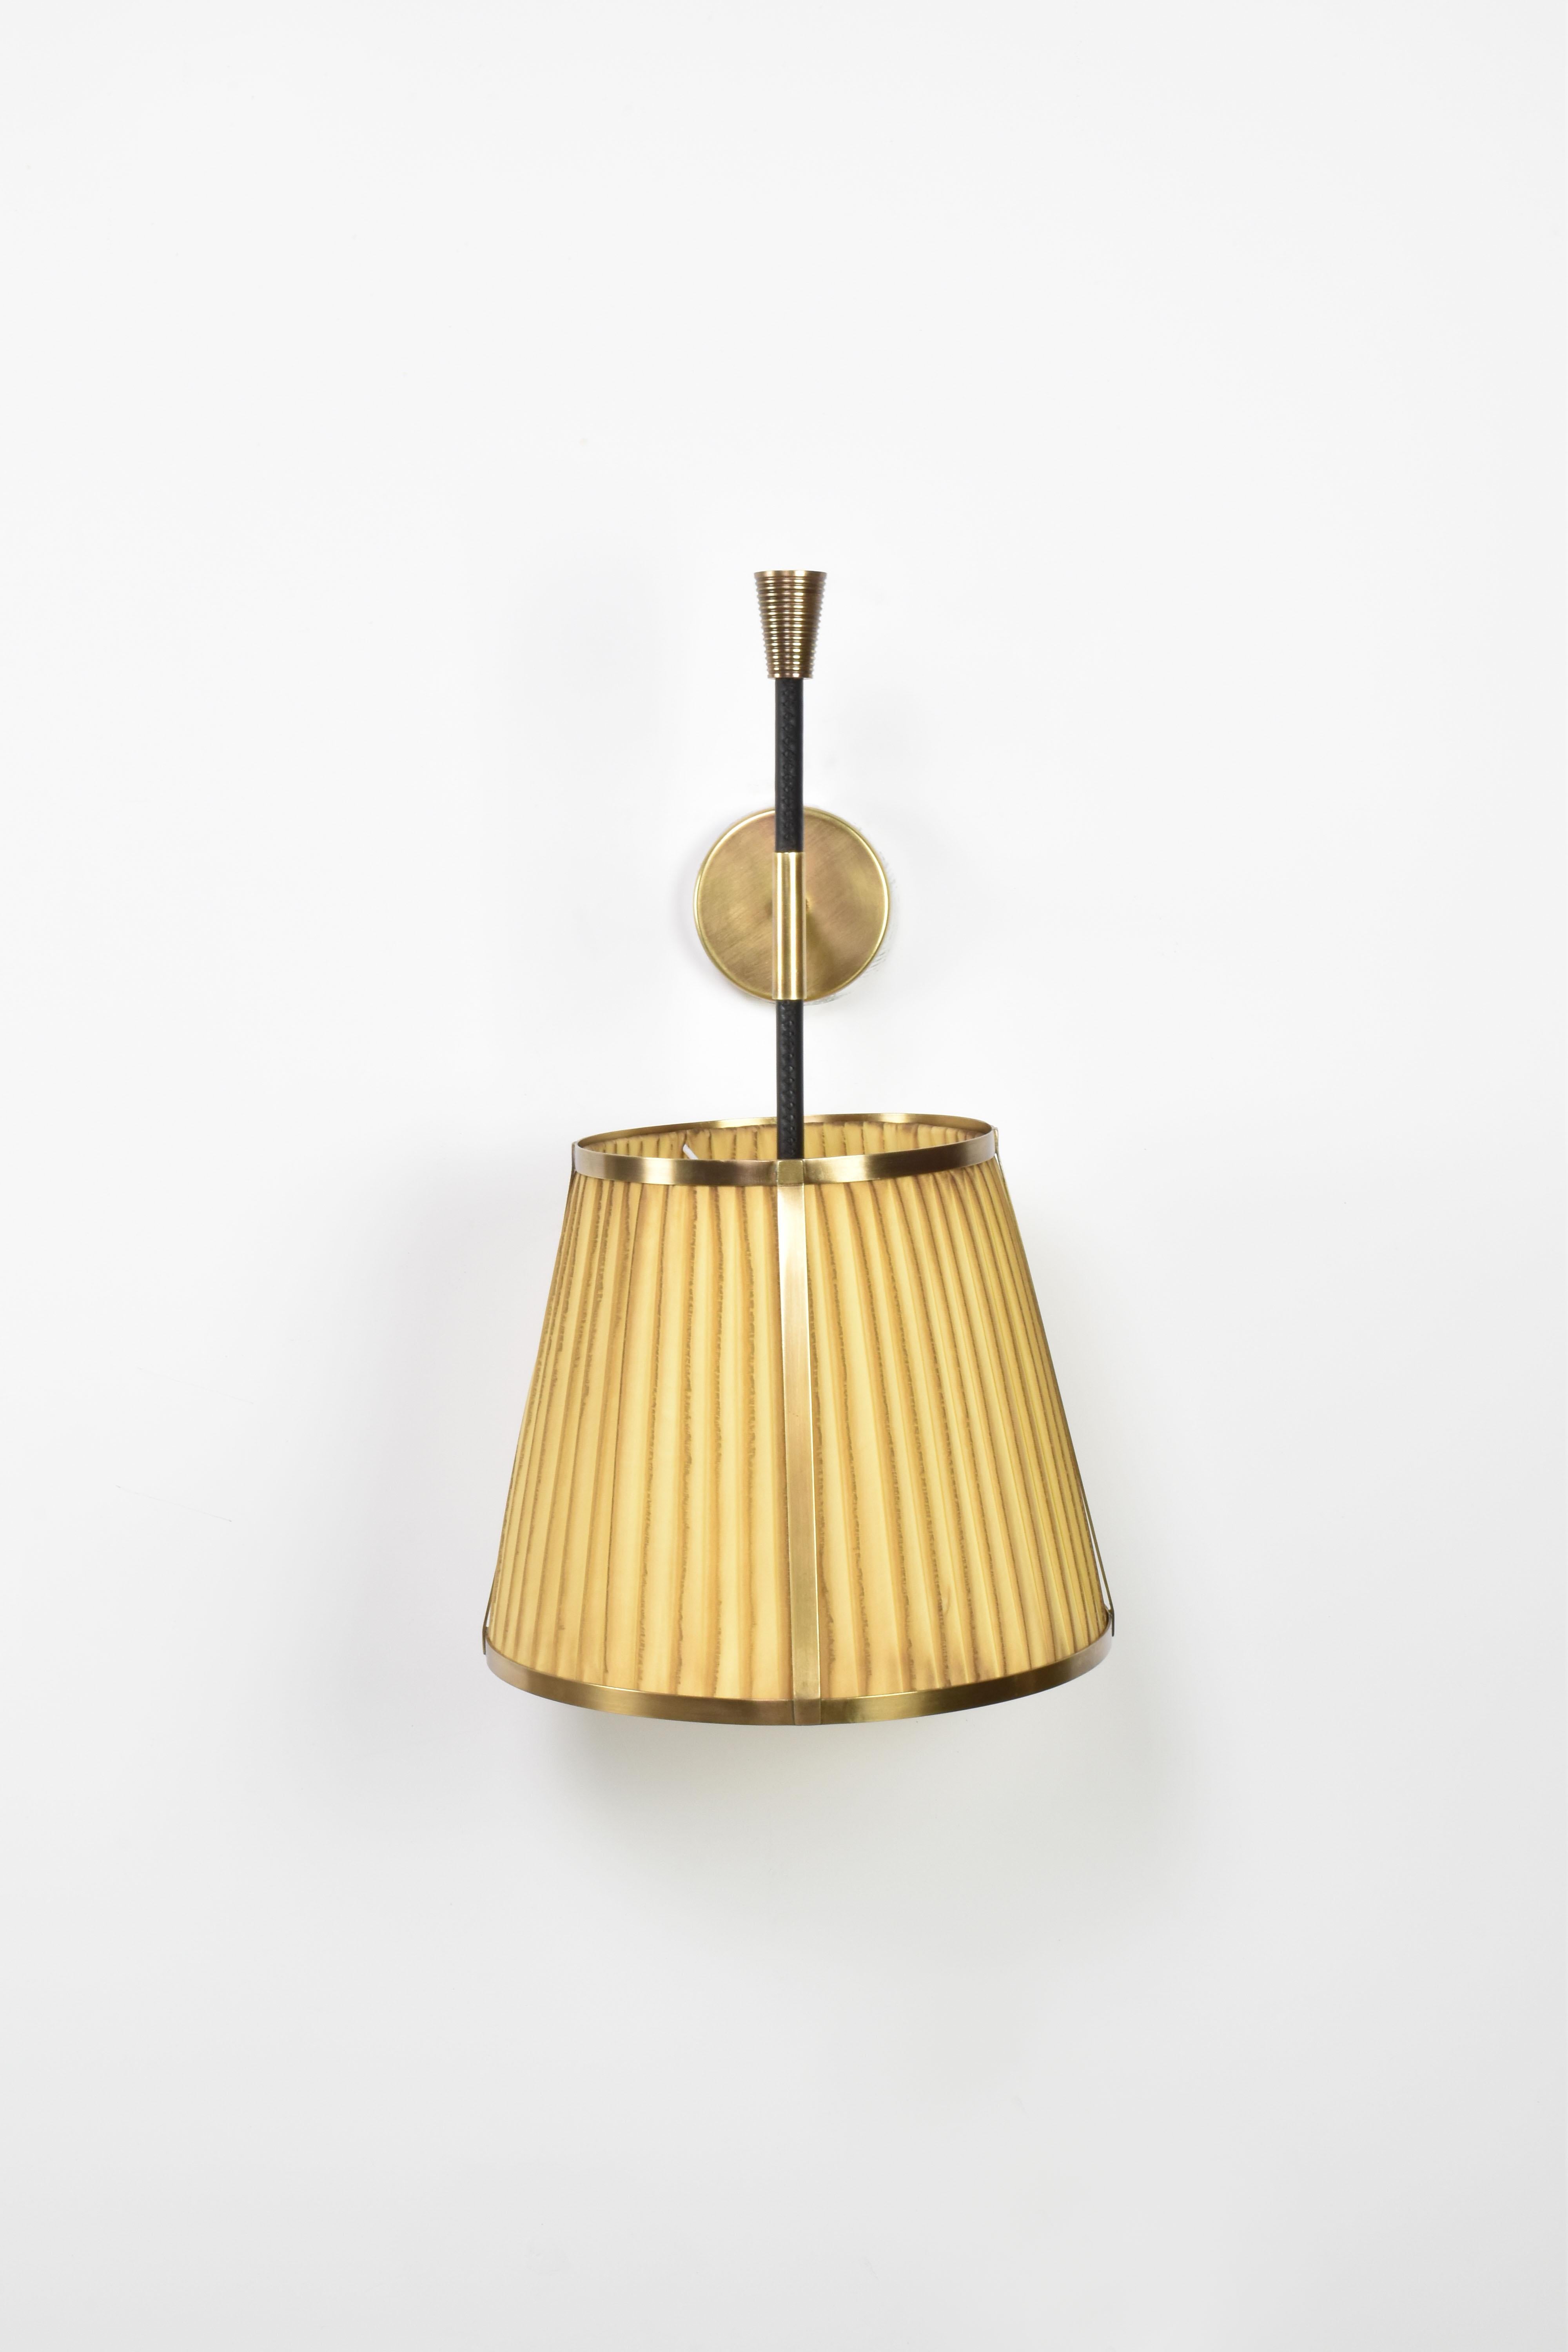 The handcrafted Caeli-w4 wall light, combines a modern brass structure with a unique, hand-dyed pleated fabric shade. The shade, available in either its natural state or a selection of dyed finishes, introduces subtle variations in each piece,